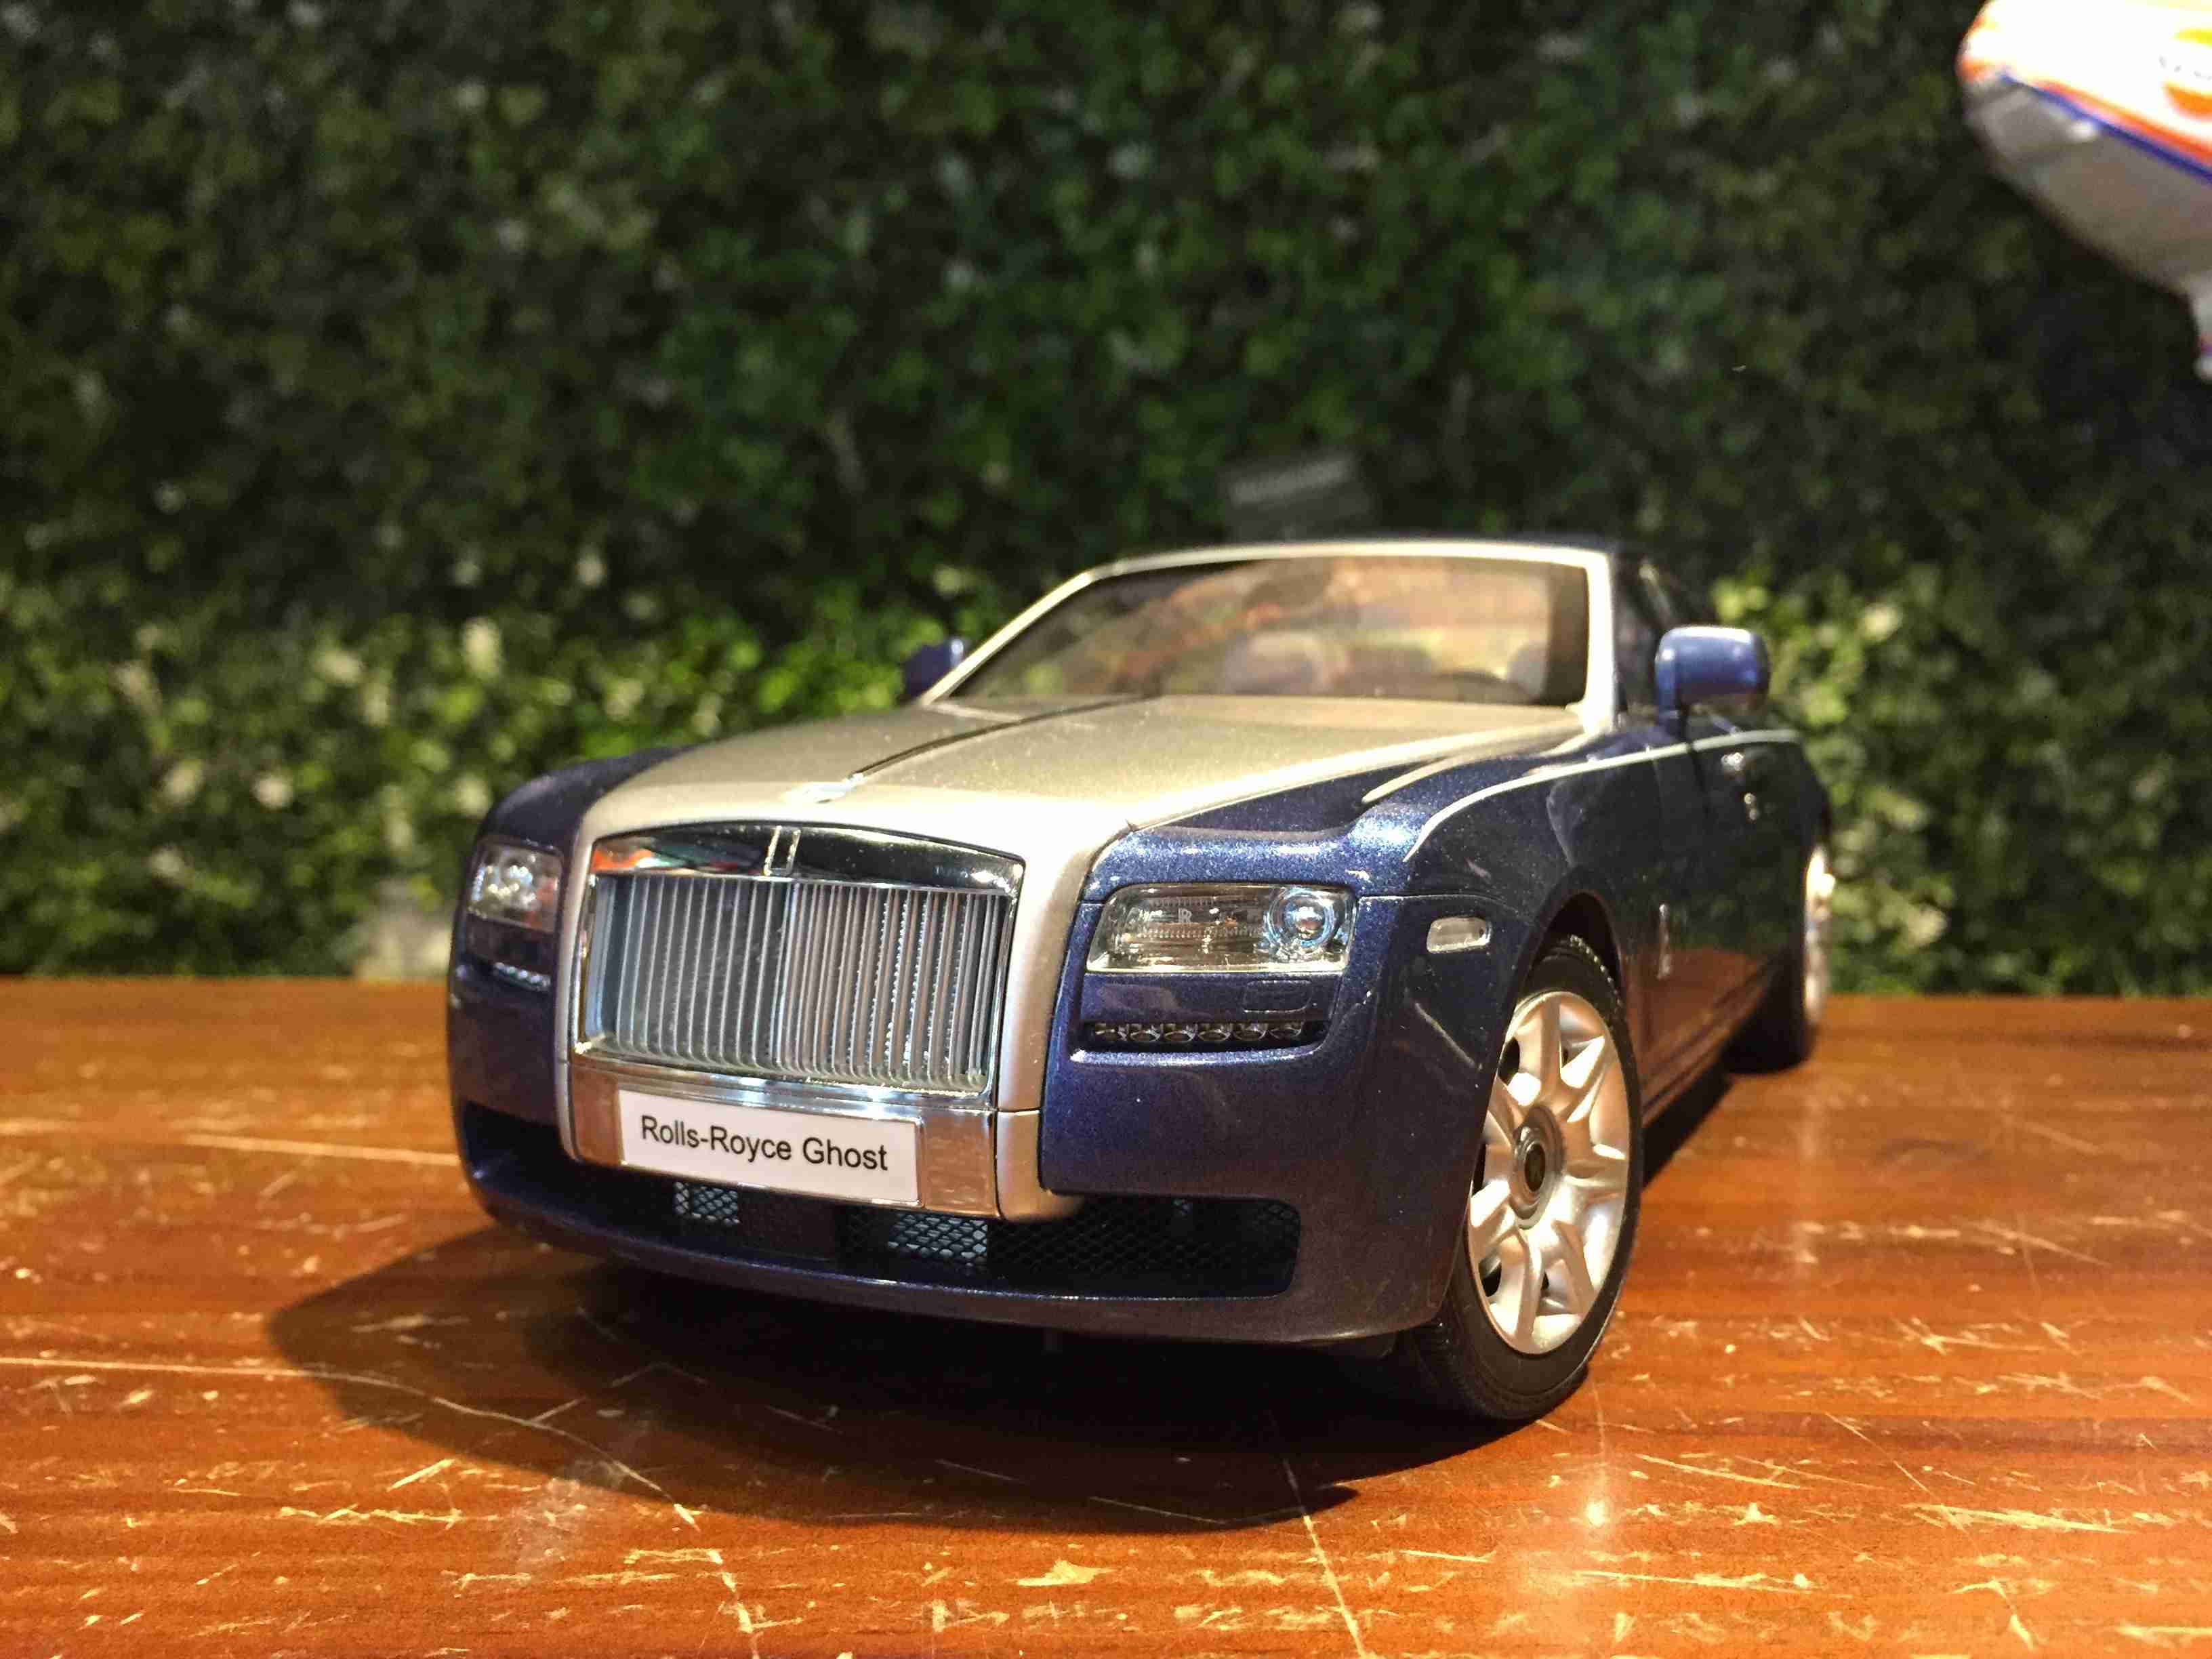 1/18 Kyosho Rolls-Royce Ghost Blue/Silver 08802MBS【MGM】